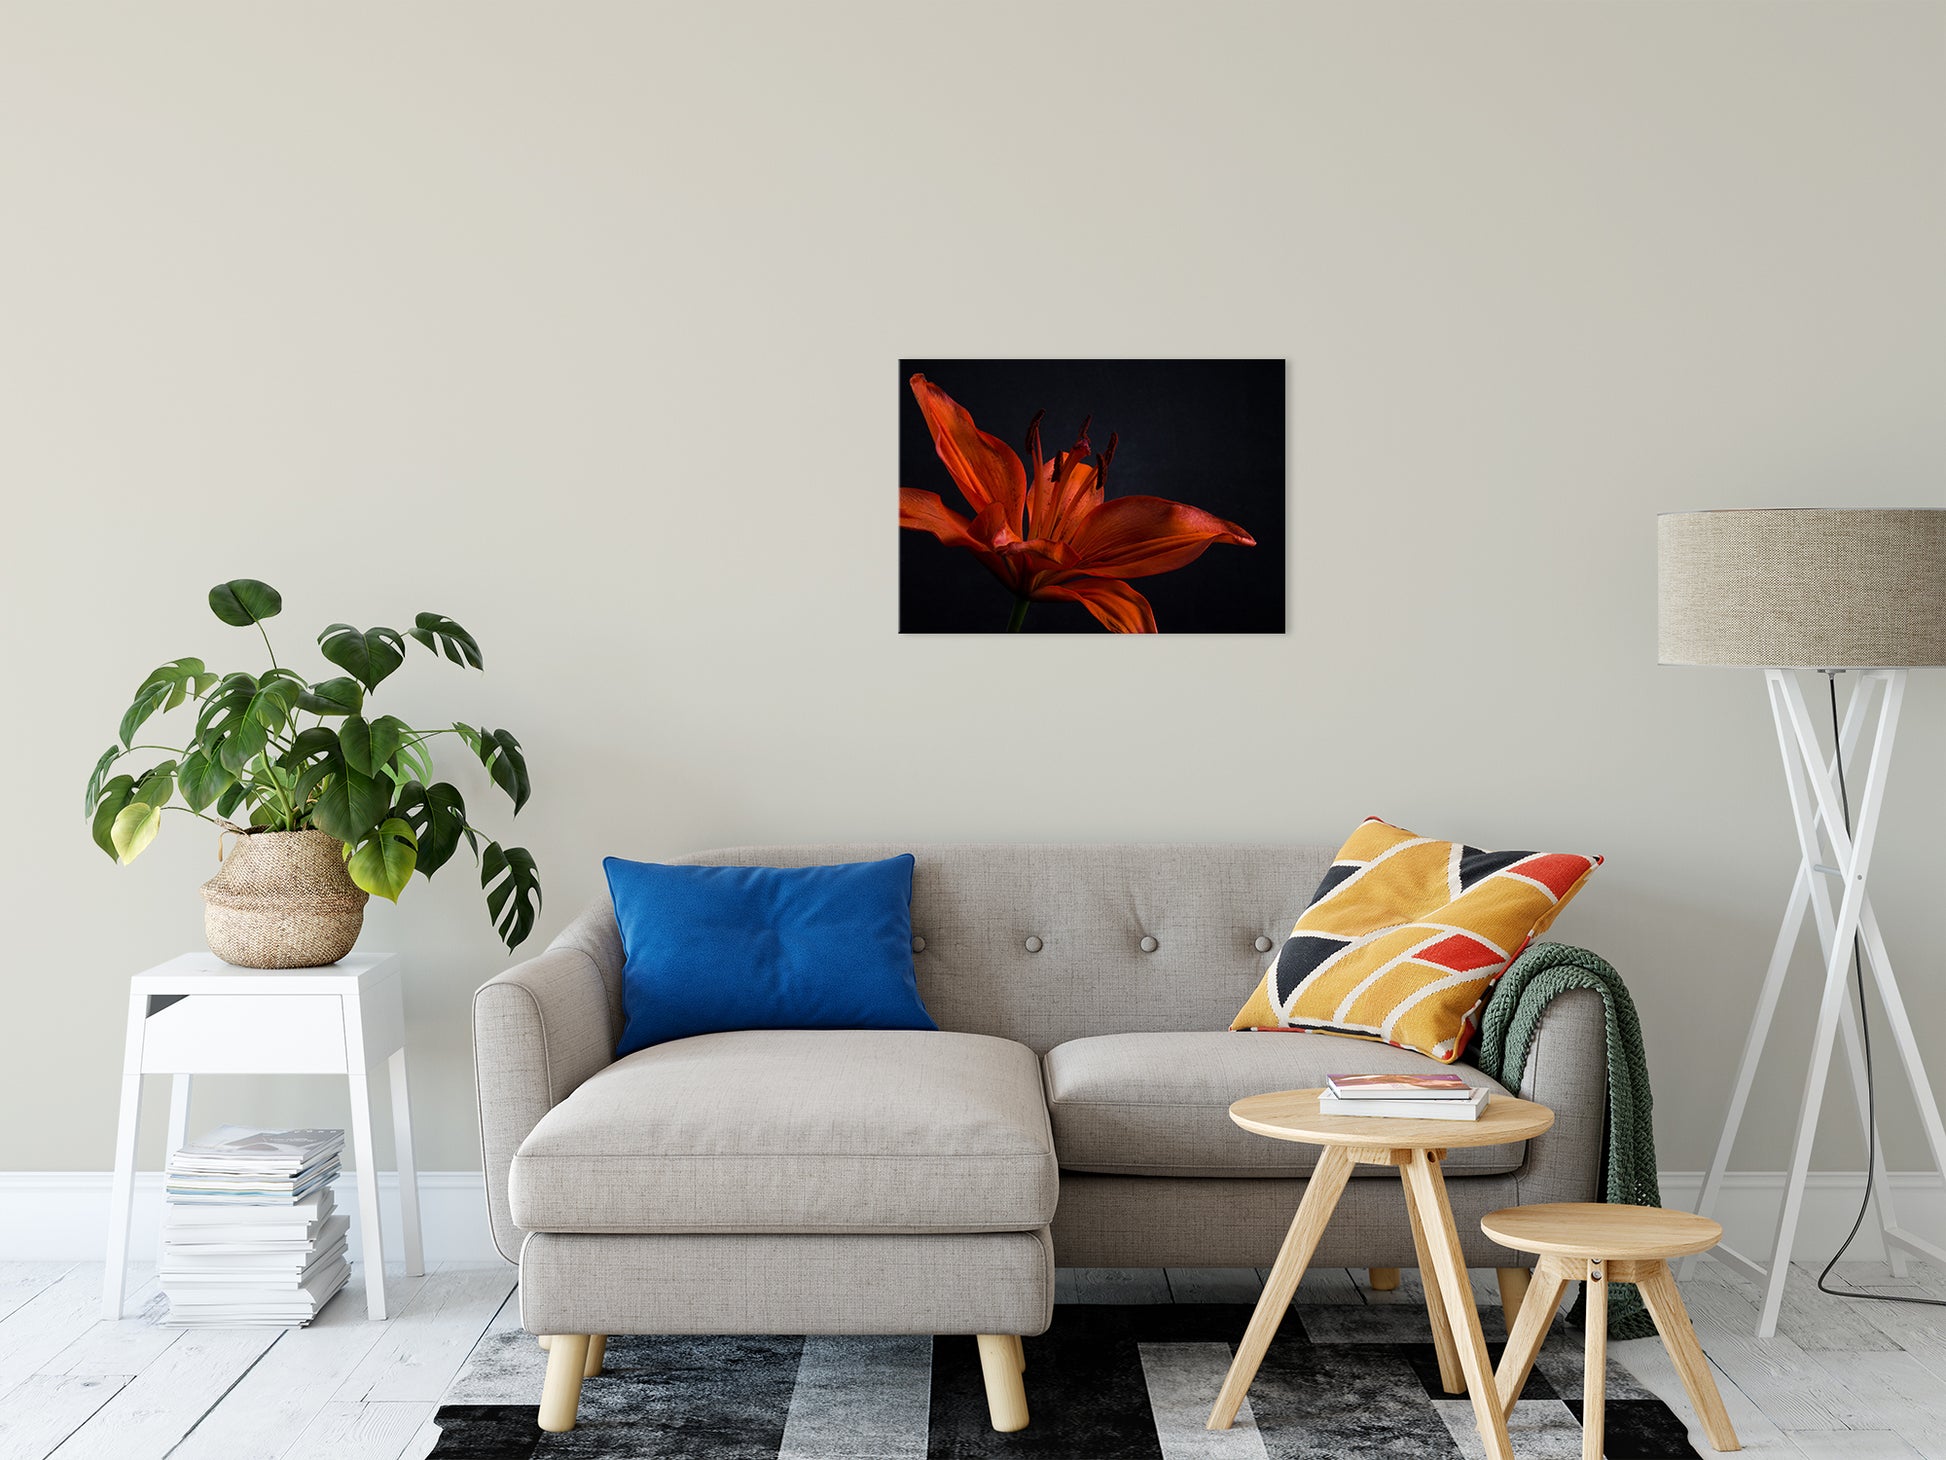 Orange Lily with Backlight Nature / Floral Photo Fine Art Canvas Wall Art Prints 20" x 30" - PIPAFINEART